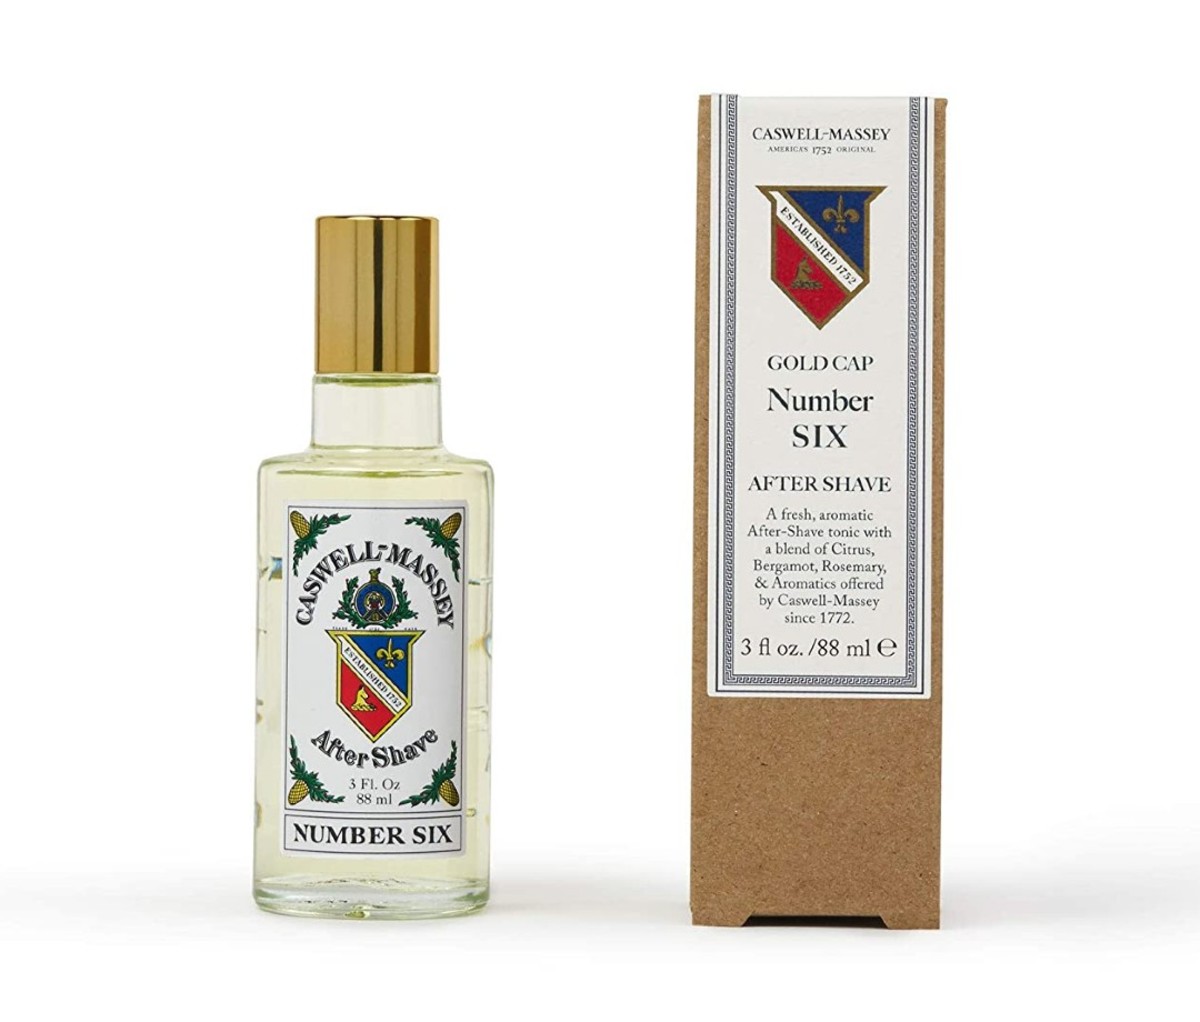 Caswell-Massey Number Six After Shave